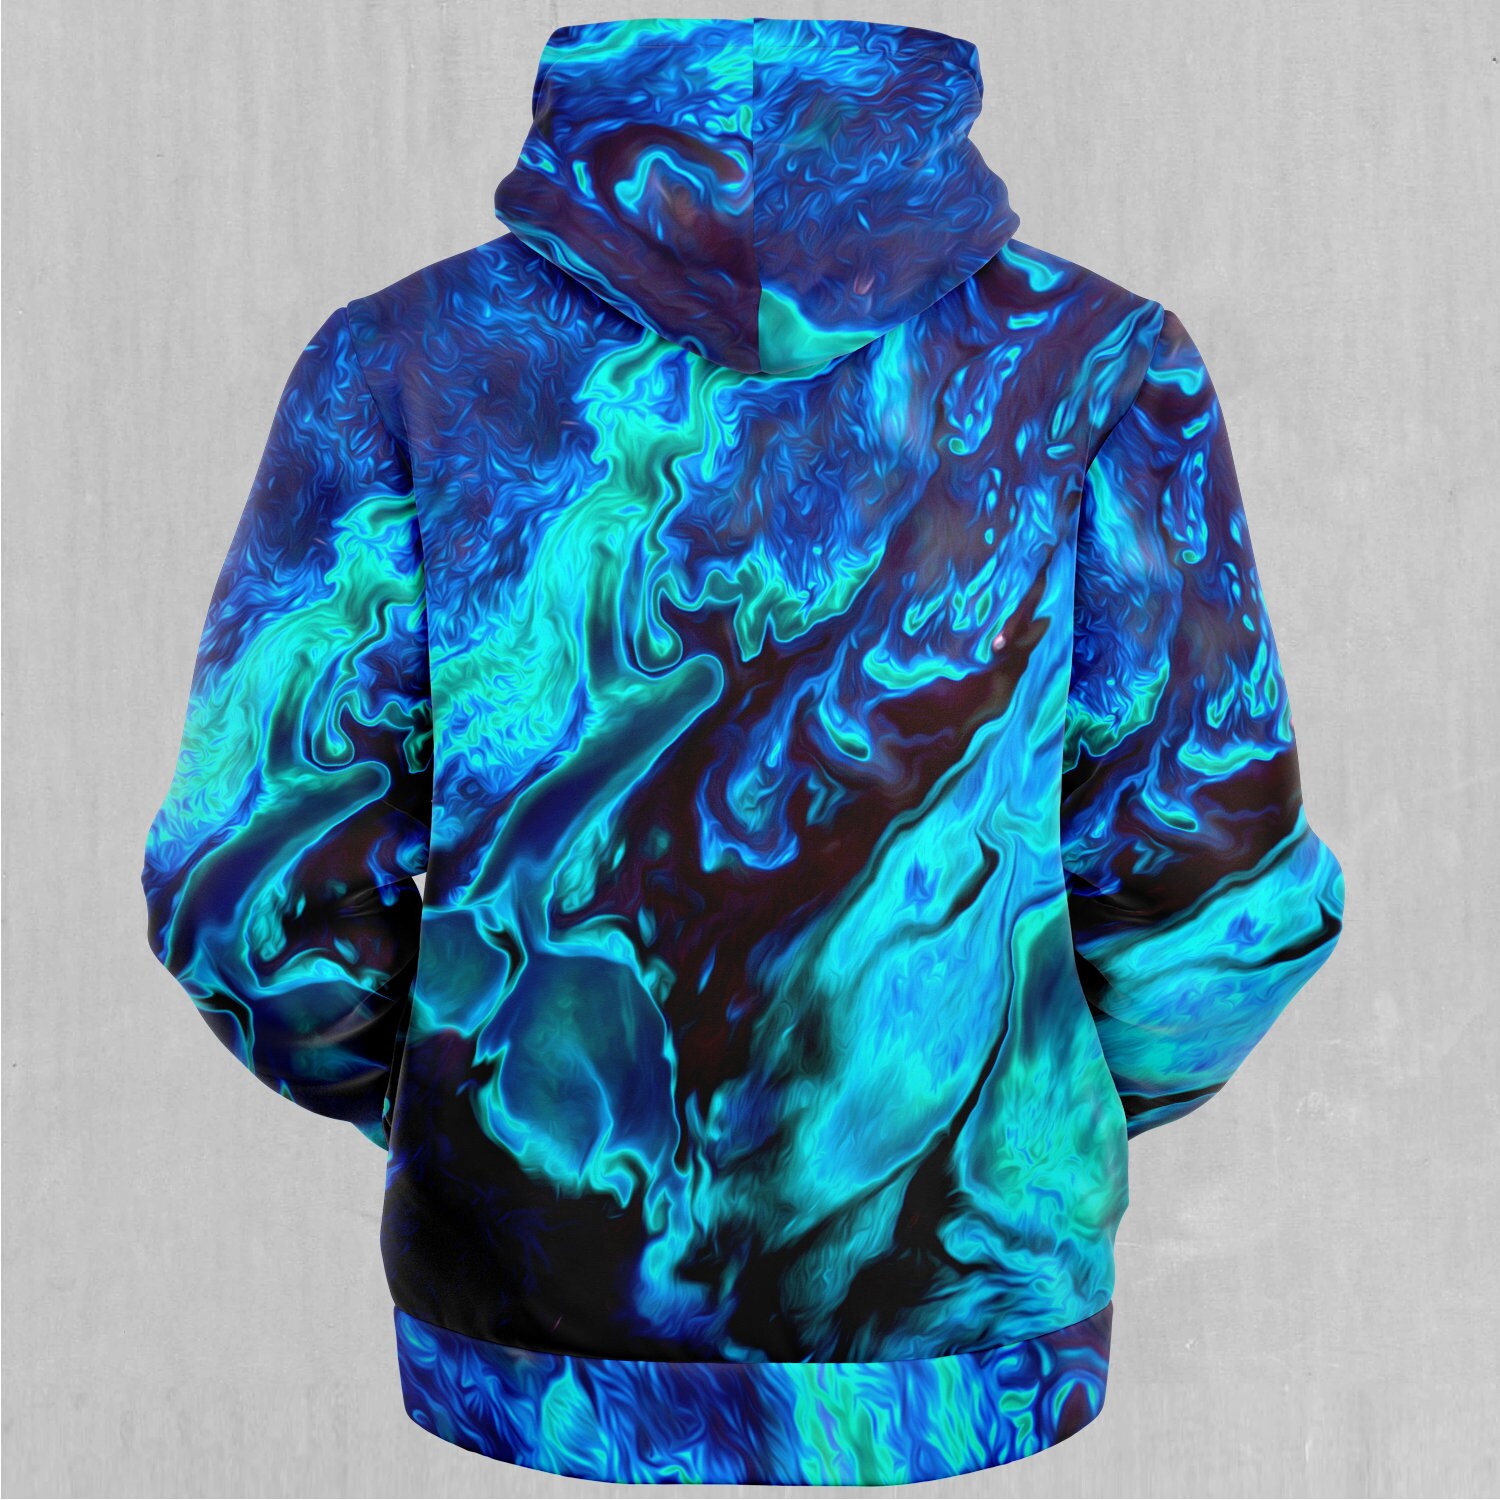 Discover Enigma Sea Psychedelic Blue Abstract Pattern Sherpa Microfleece Zip-Up Hoodie